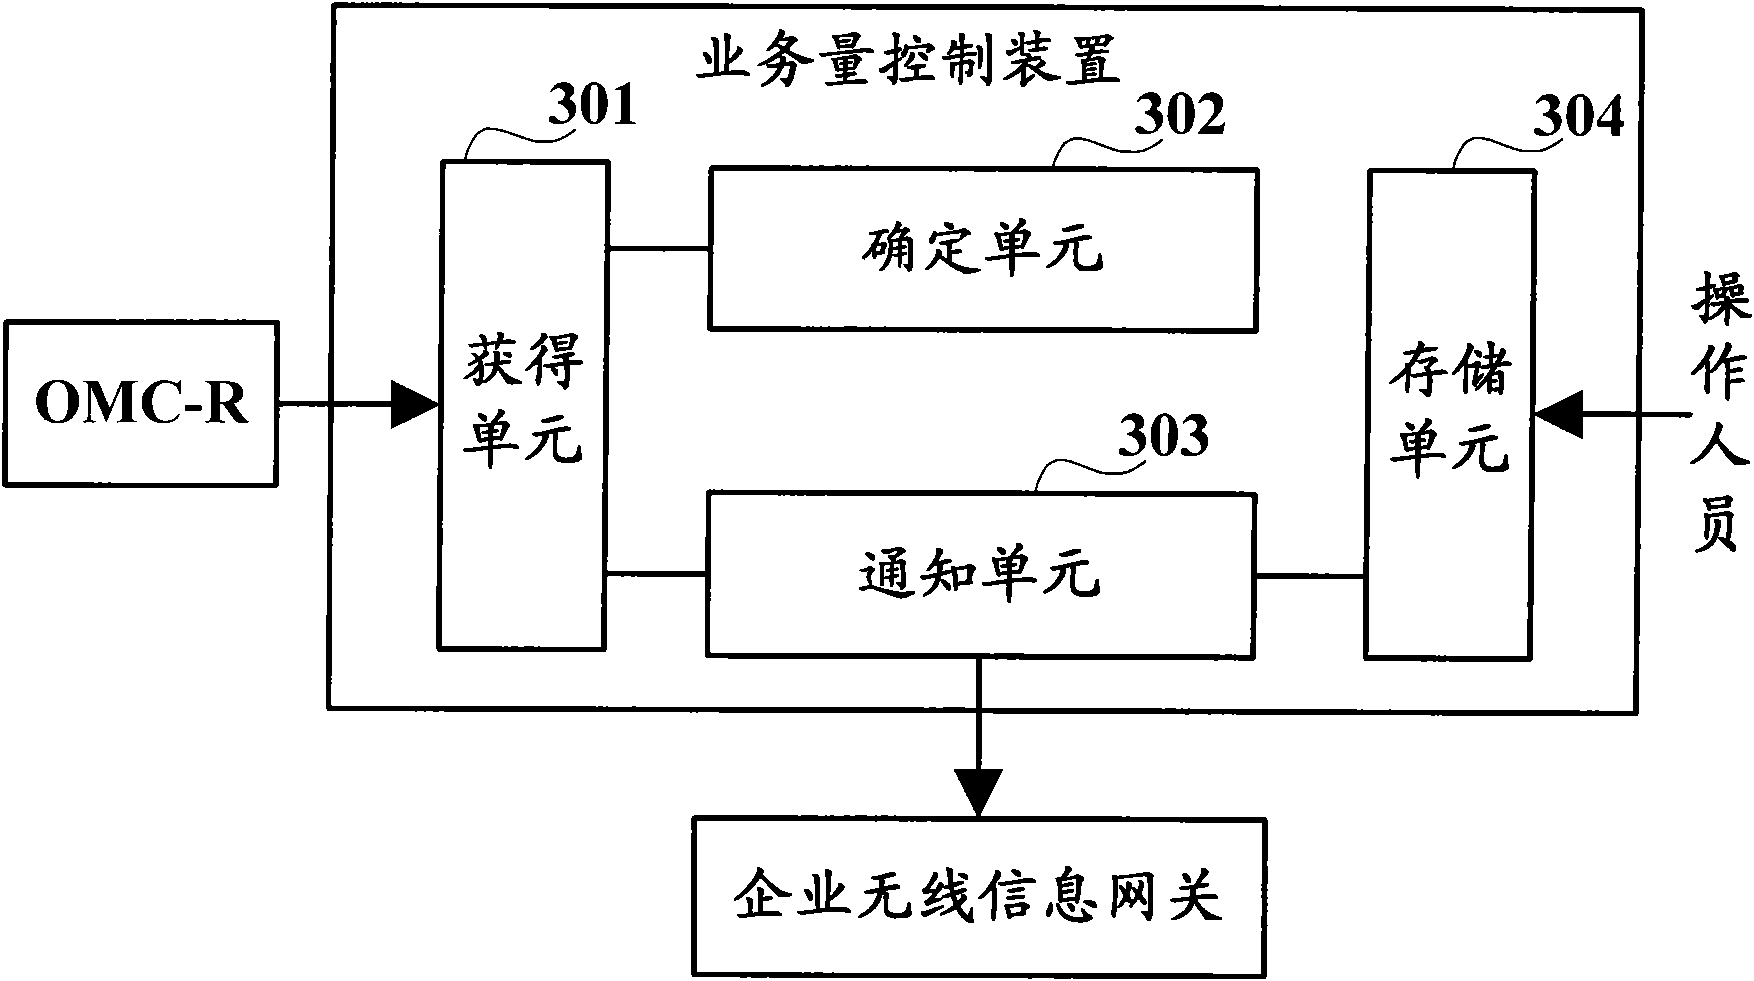 Method for controlling service volume of enterprise wireless information gateway, device and system therefor